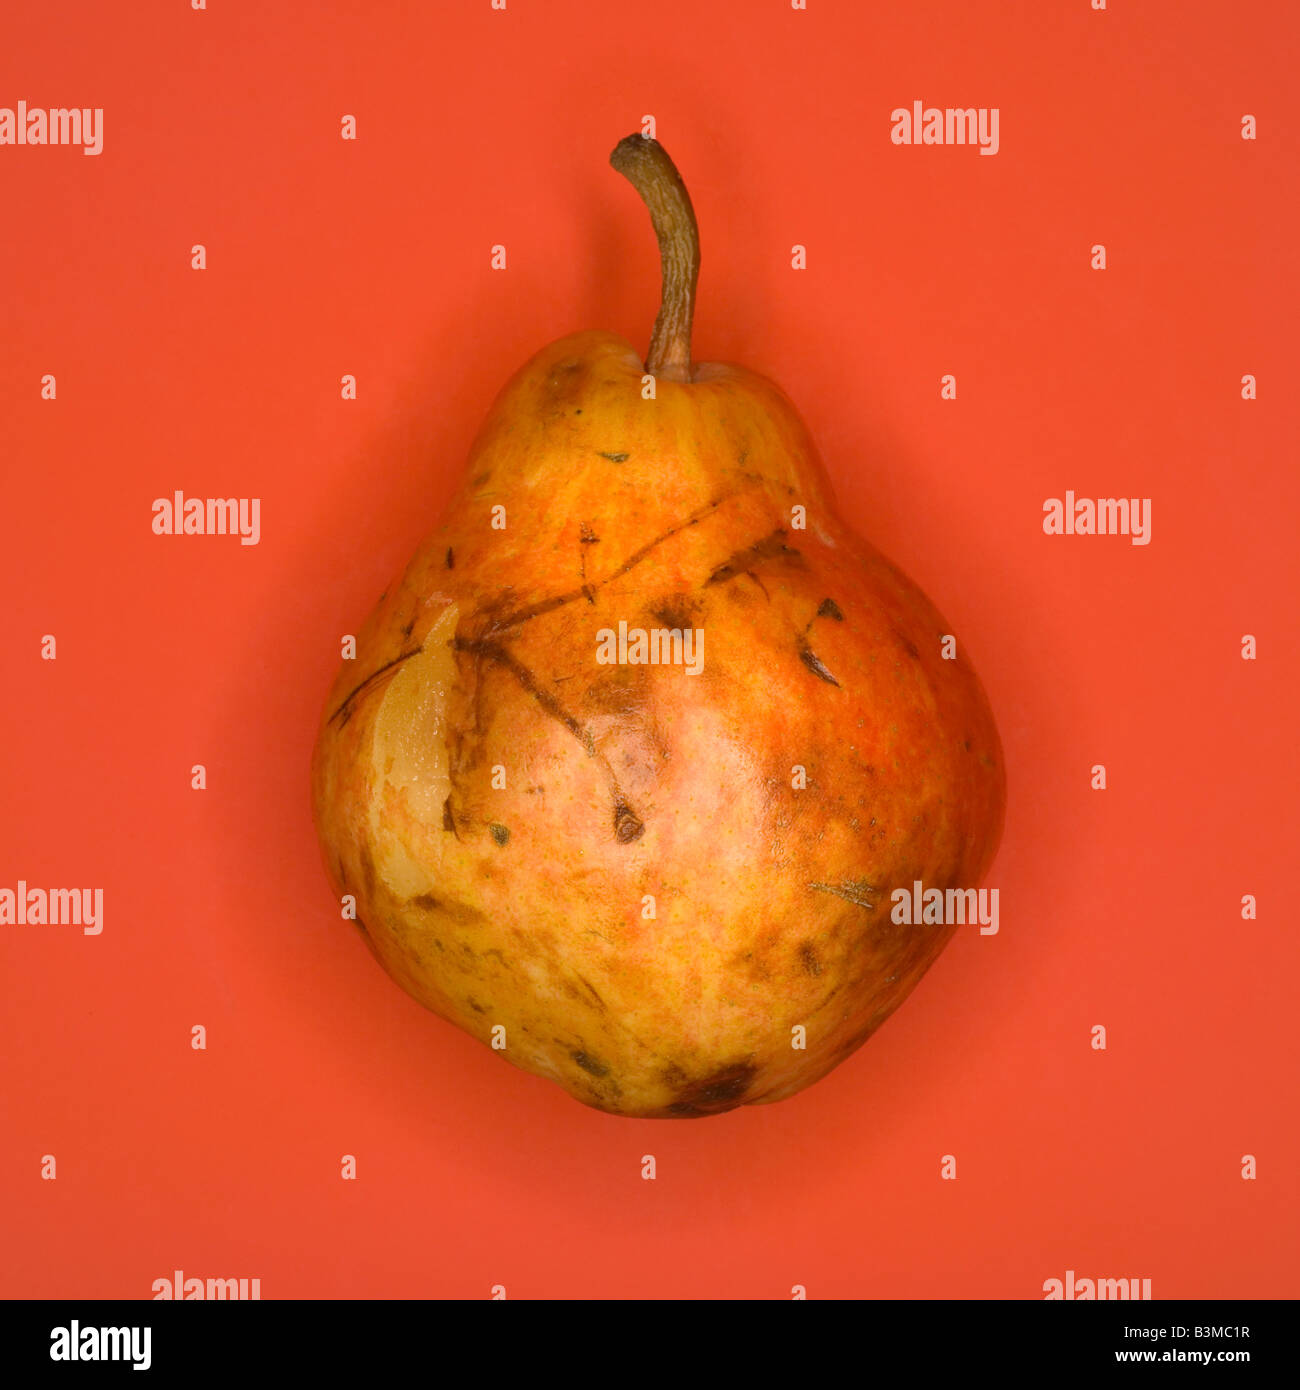 Pear, elevated view Stock Photo